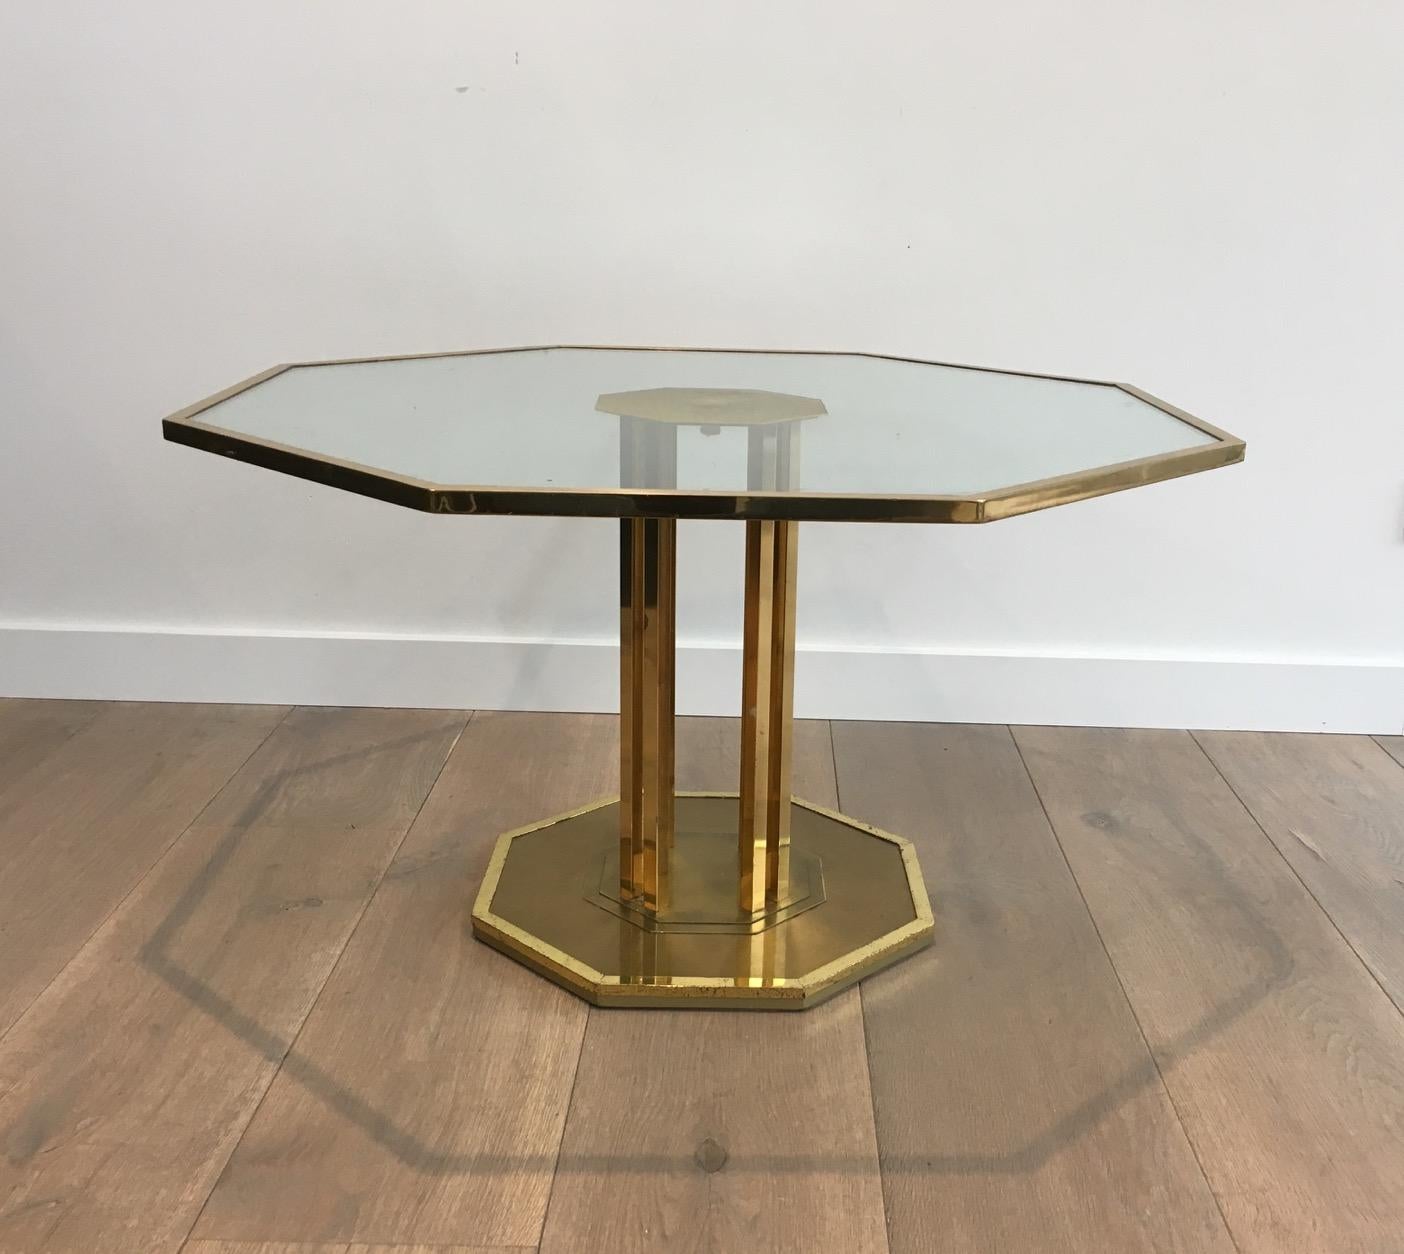 Late 20th Century Rare Octagonal Brass and Glass Design Coffee Table, French, circa 1970 For Sale